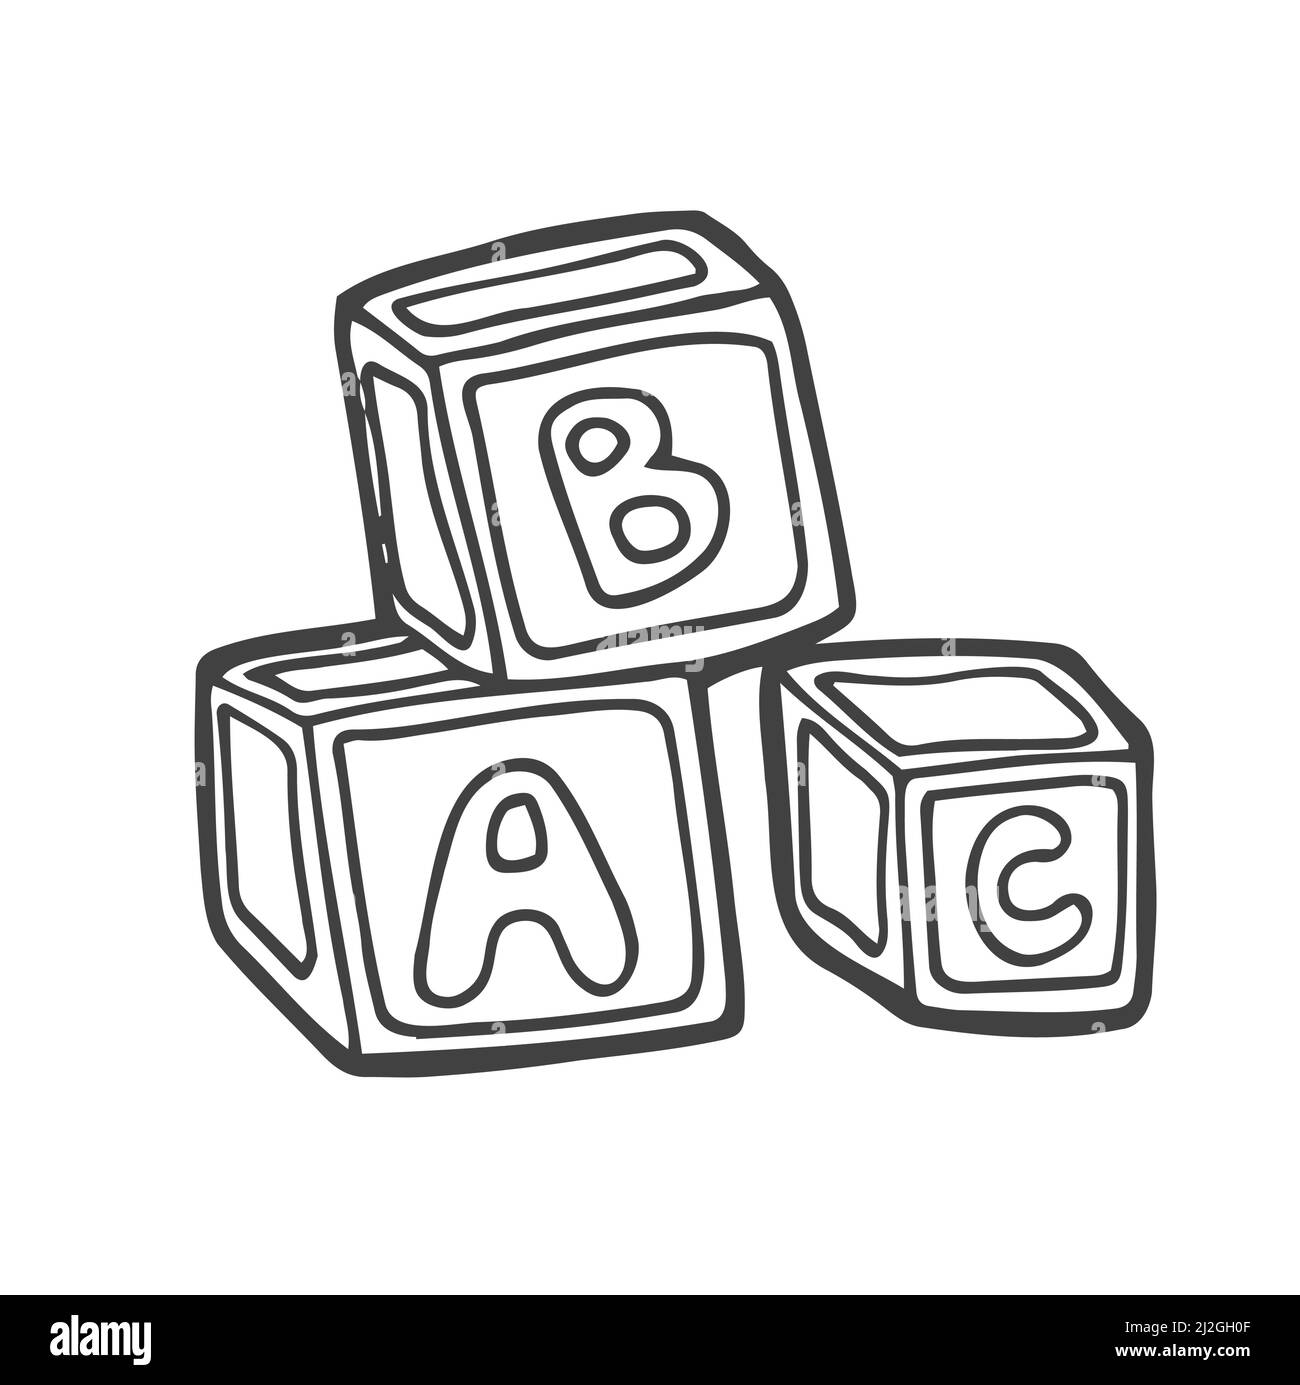 Doodle style children's block toys with alphabet on them in vector format. Isolated Stock Vector